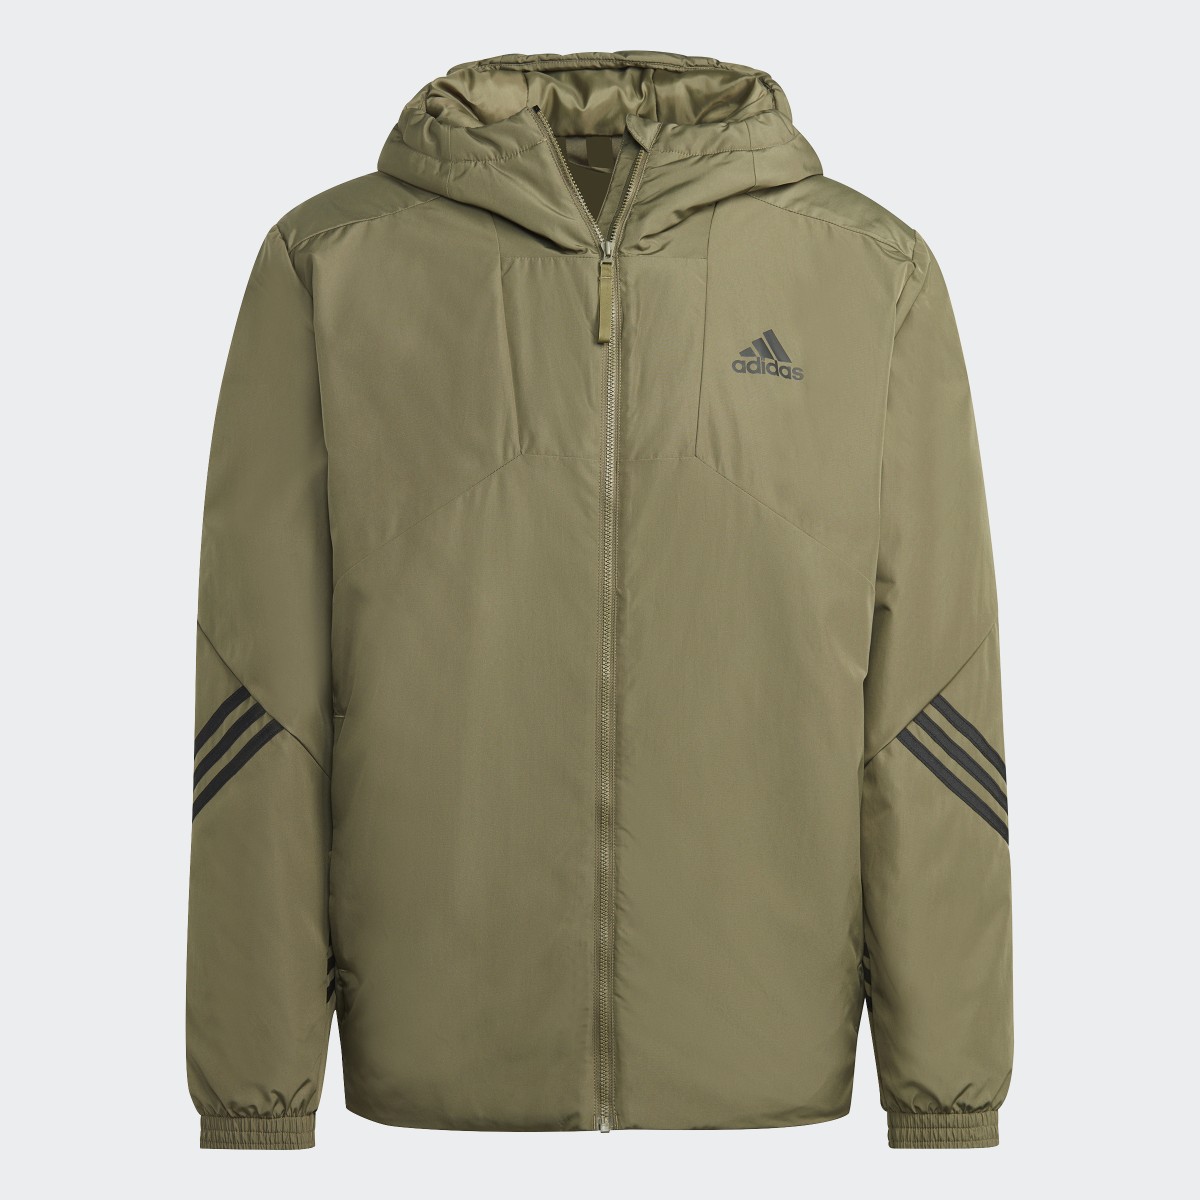 Adidas Back to Sport Hooded Jacket. 5